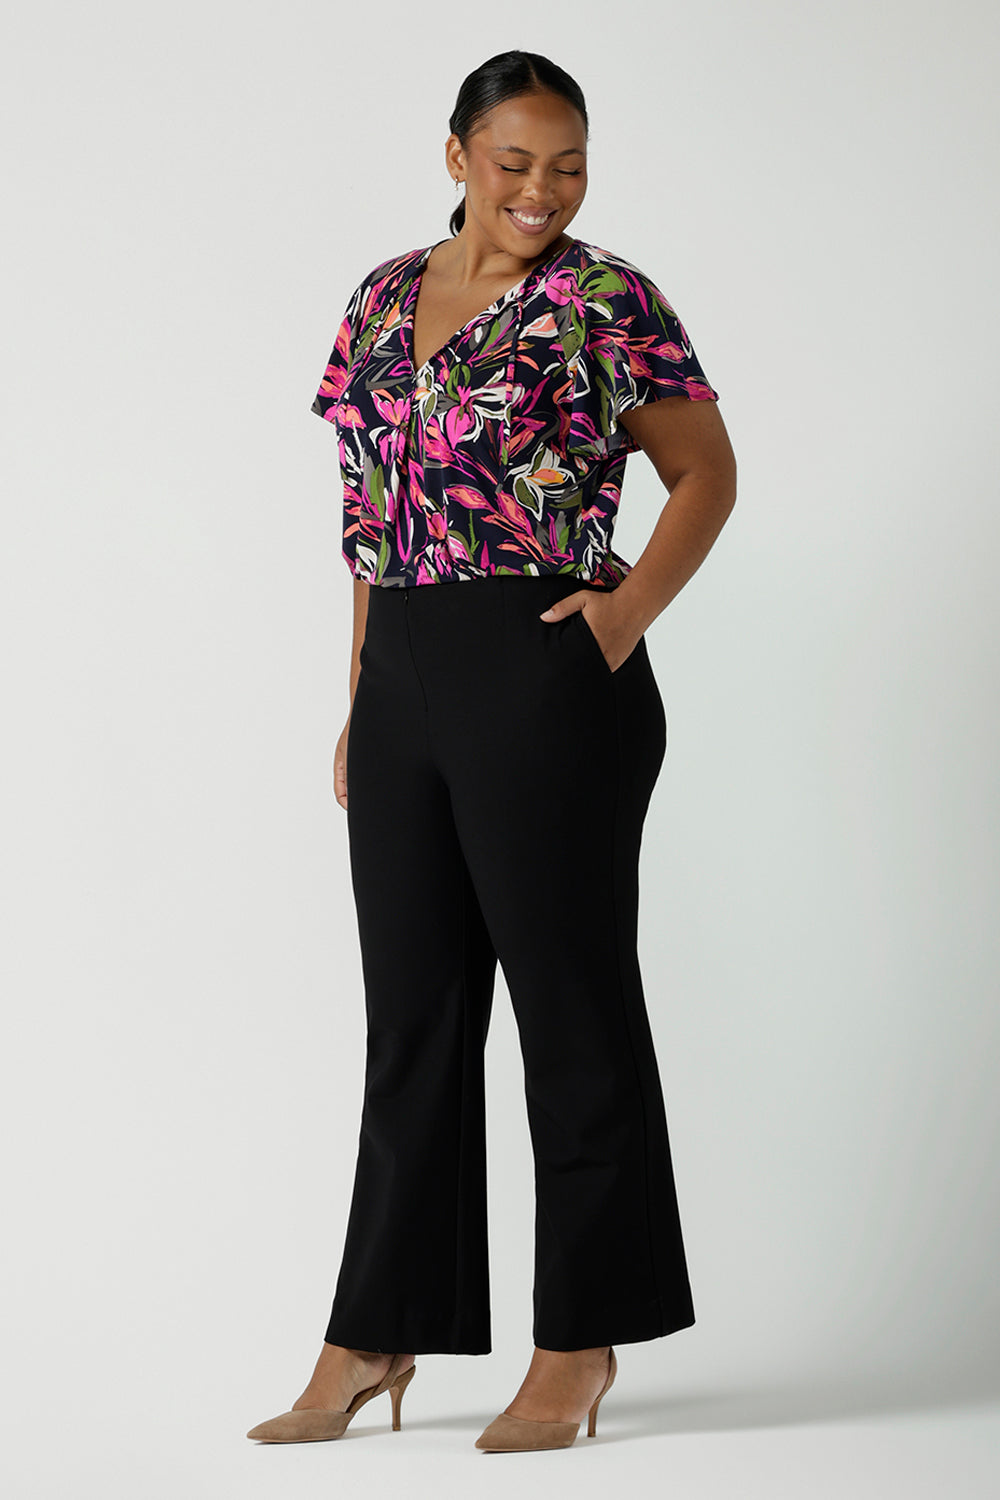 Size 16 Woman wears the Brett Pant in black, a soft tailored ponte jersey pant with a slight kick flare at the bottom. Made in Australia for women size 8 - 24.